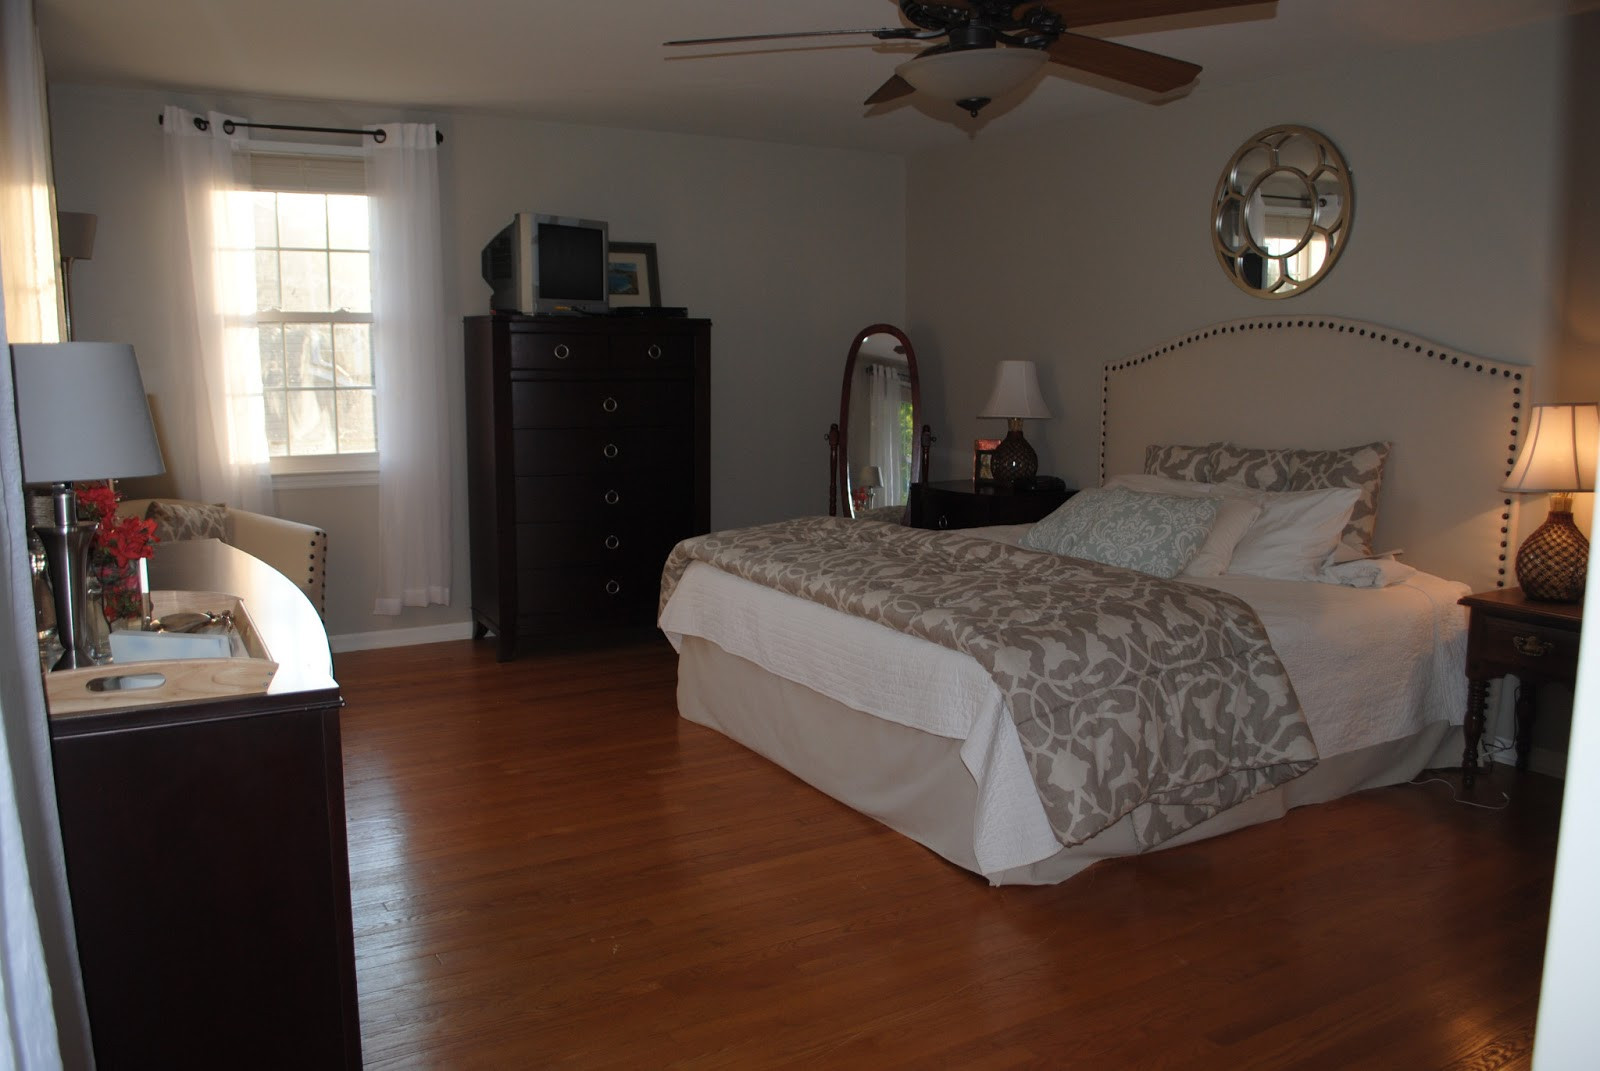 Master Bedroom Makeover
 New Mama s Corner Master Bedroom Makeover REVEAL From